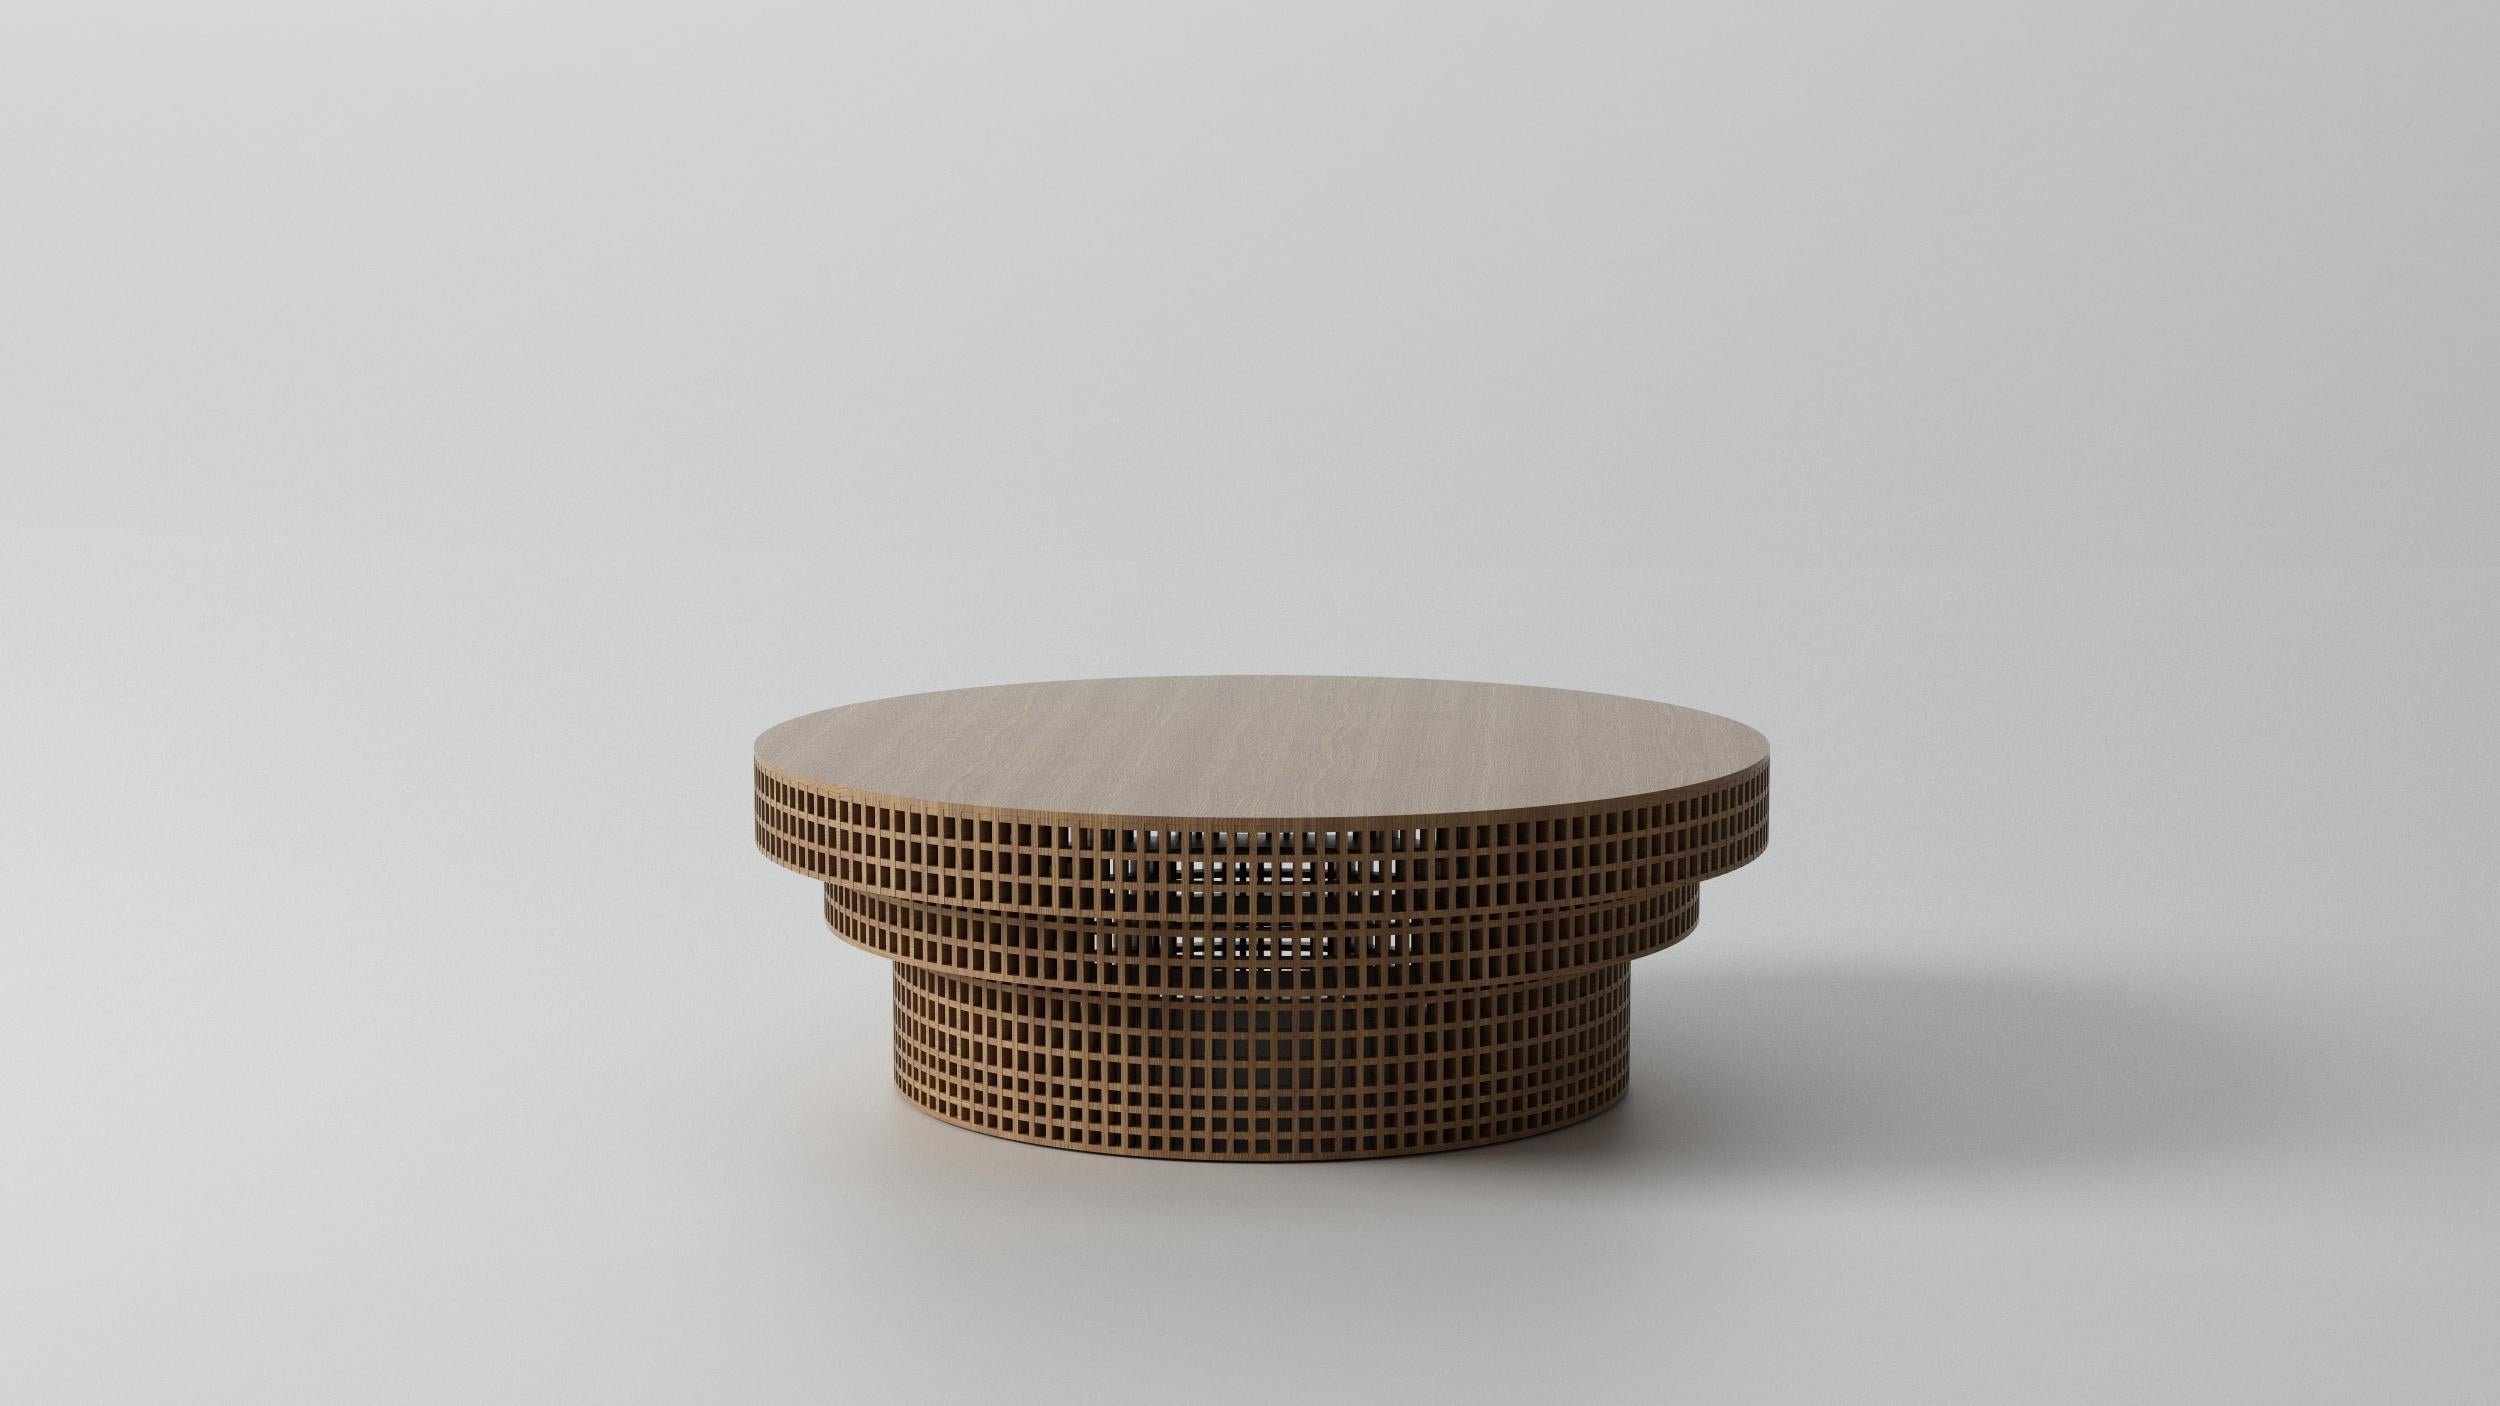 Carabottino coffee table by Cara Davide
Carabottino Collection
Medulum
Dimensions: Ø 150 x H 38 cm
Materials: European walnut 


A wooden grating in a two-dimensional form traditionally made with wooden slats, it is considered an accessory element,